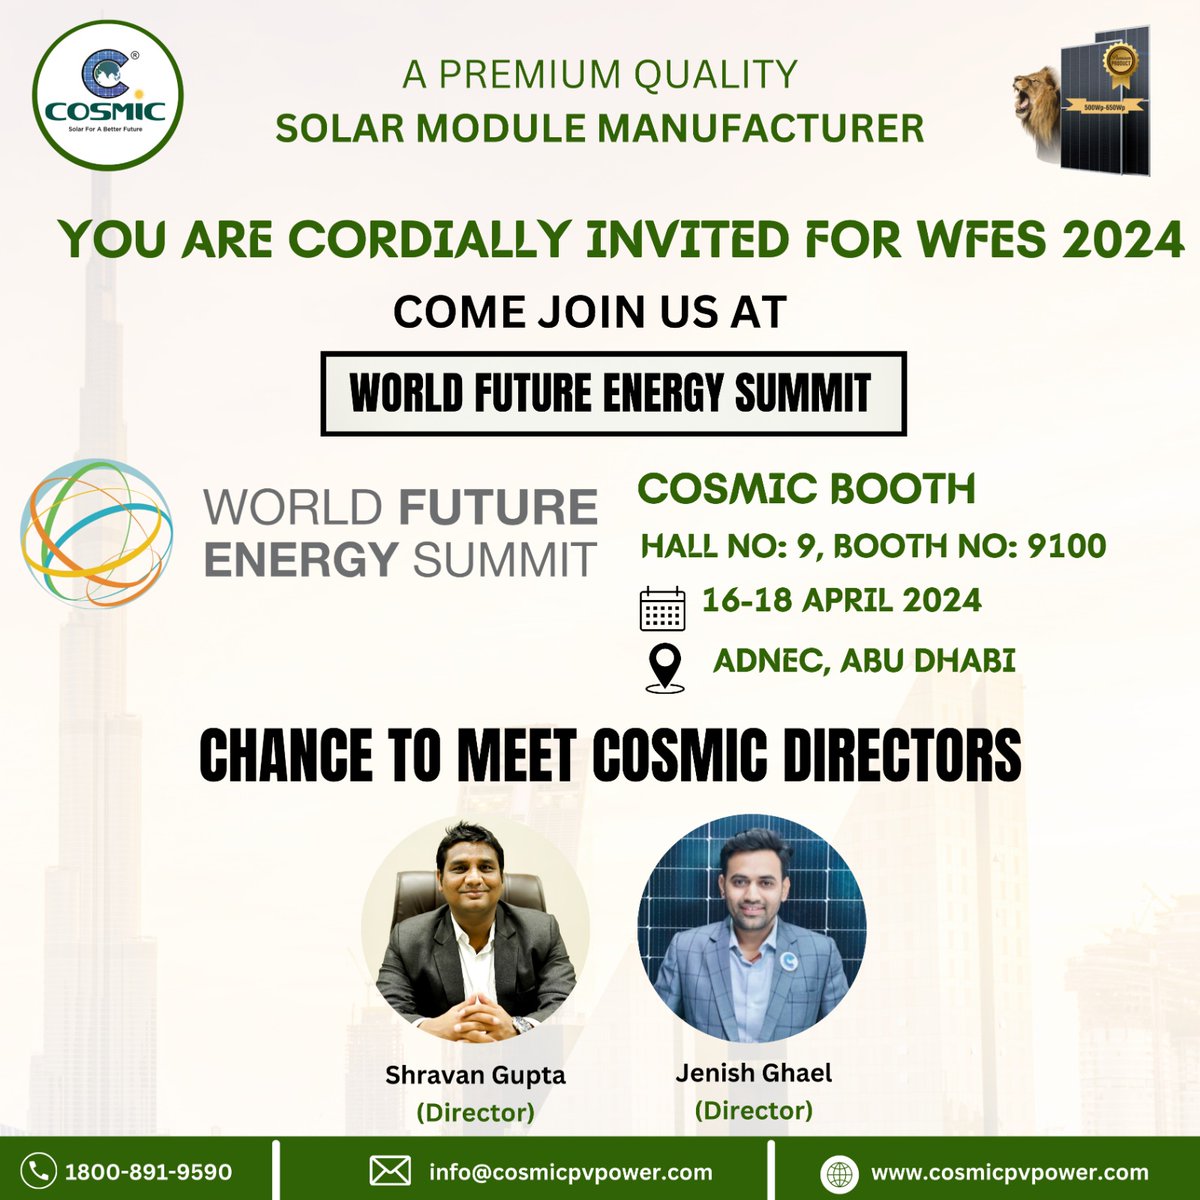 The wait is now over. The World Future Energy Summit is finally here… We warmly invite you to visit and meet our Cosmic Directors at WFES 2024, ADNEC, ABU Dhabi from 16th to 18th April 2024. See you bright and early at Hall No - 9 and Booth No - 9100. Thank You!!! #Solarenergy